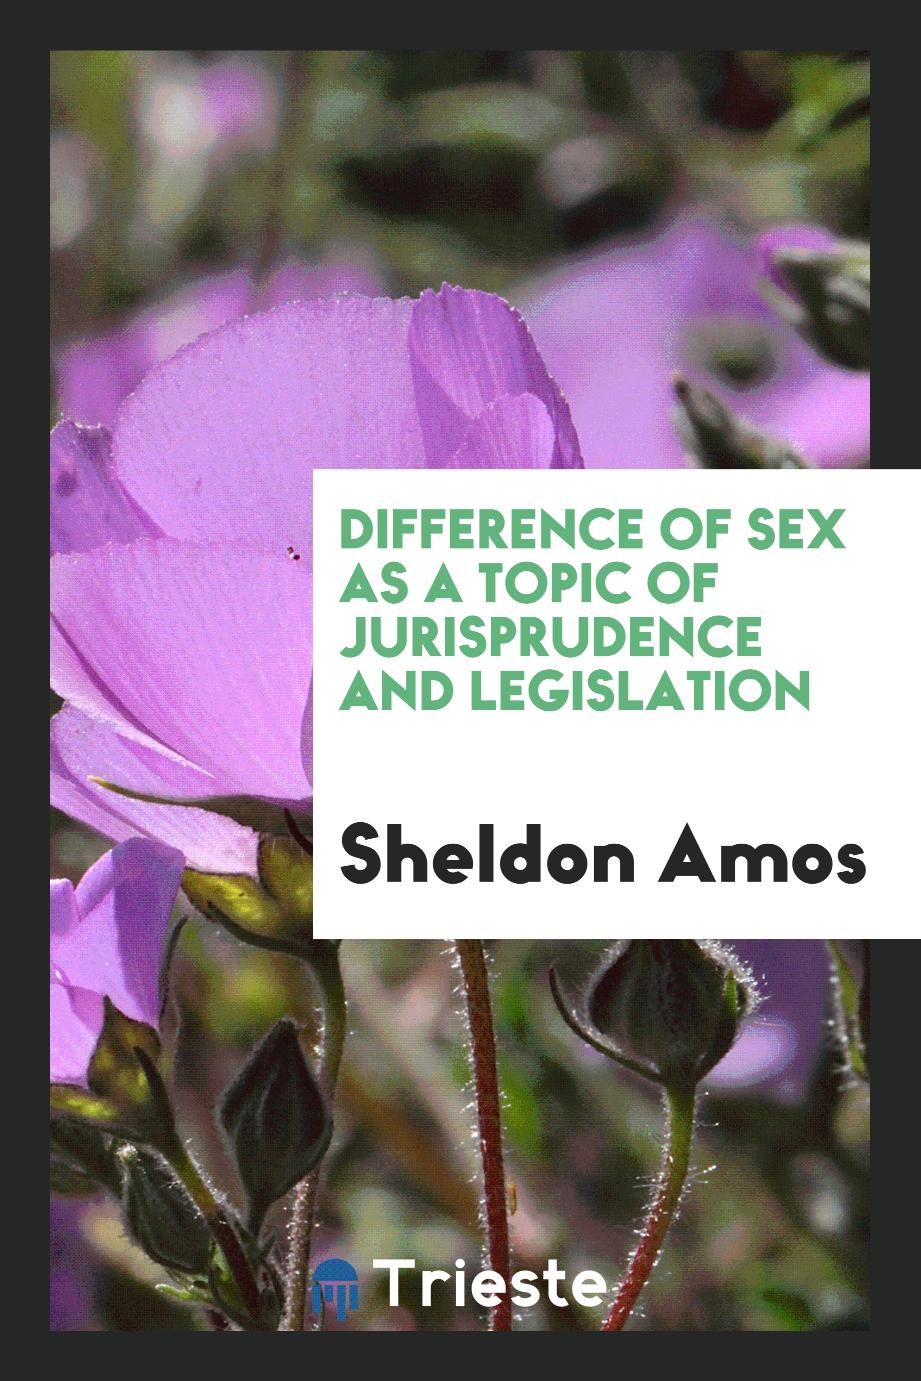 Difference of sex as a topic of jurisprudence and legislation